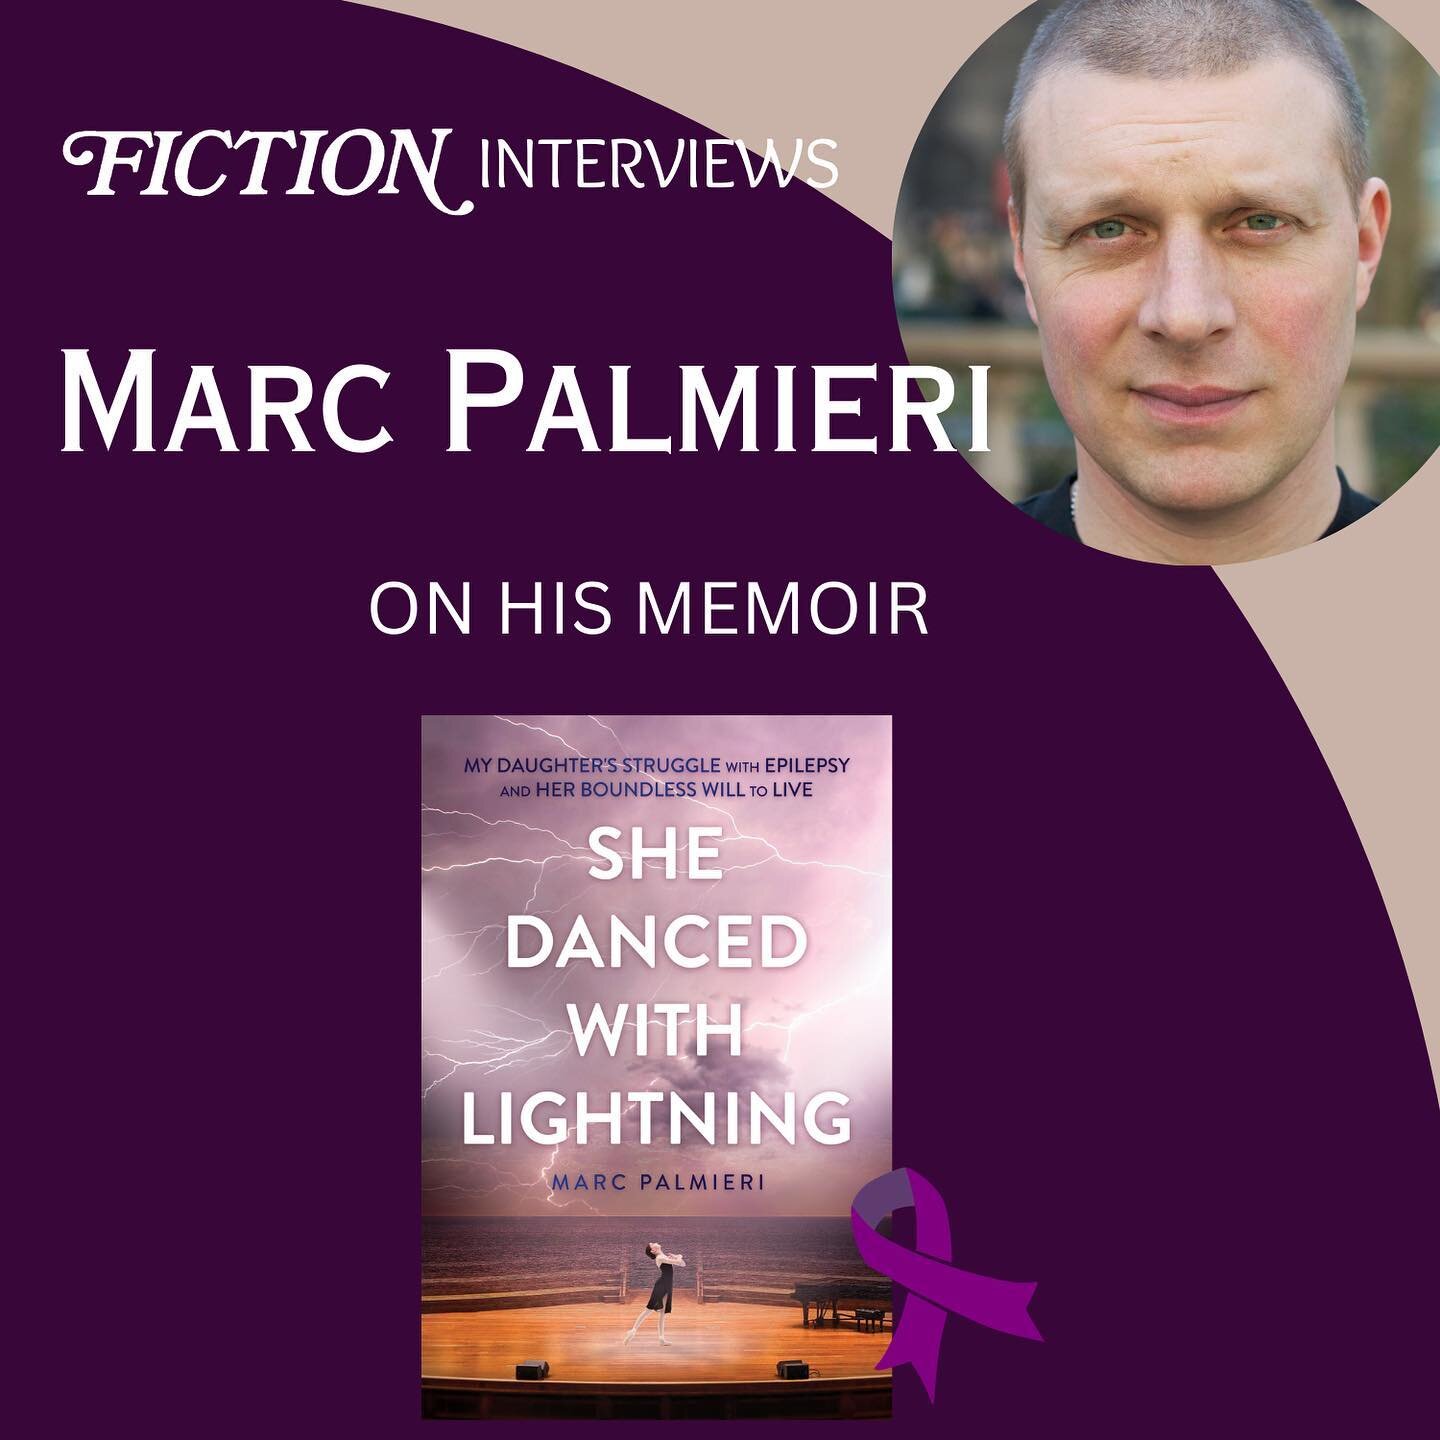 &ldquo;She Danced with Lightning&rdquo; will capture you as you watch the fierce love between a girl born with epilepsy and her father. Remind yourself to breathe. In this interview, author Marc Palmieri discusses his experience as a father and a wri